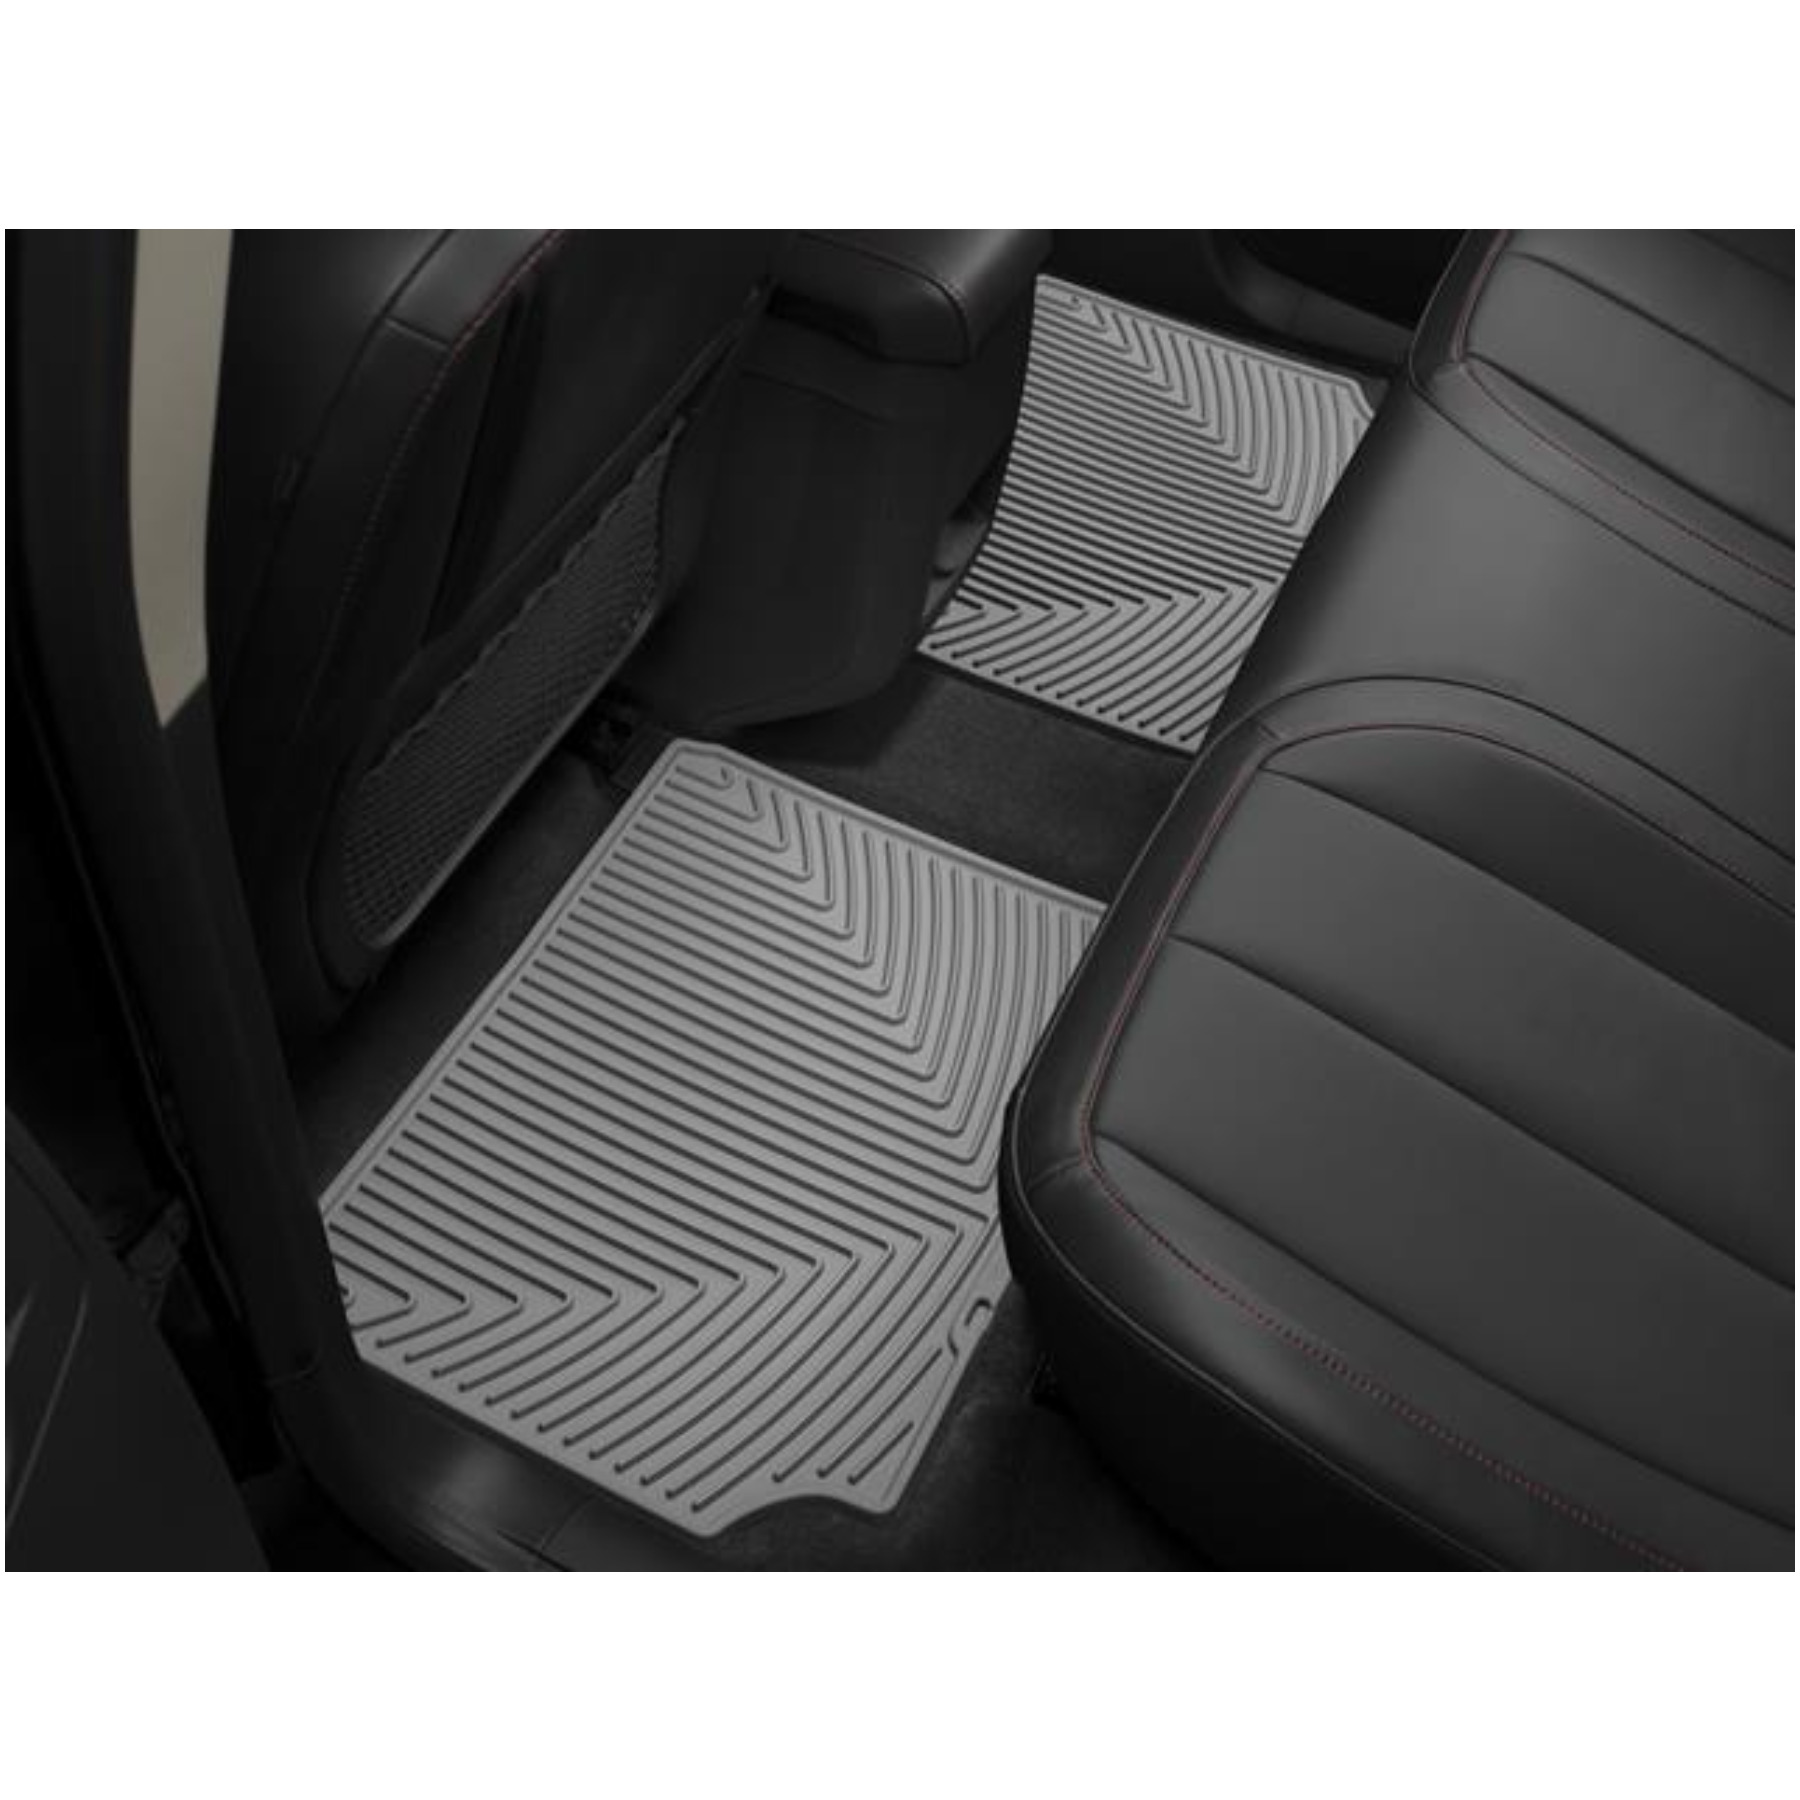 2011 Ford explorer all weather mats #8